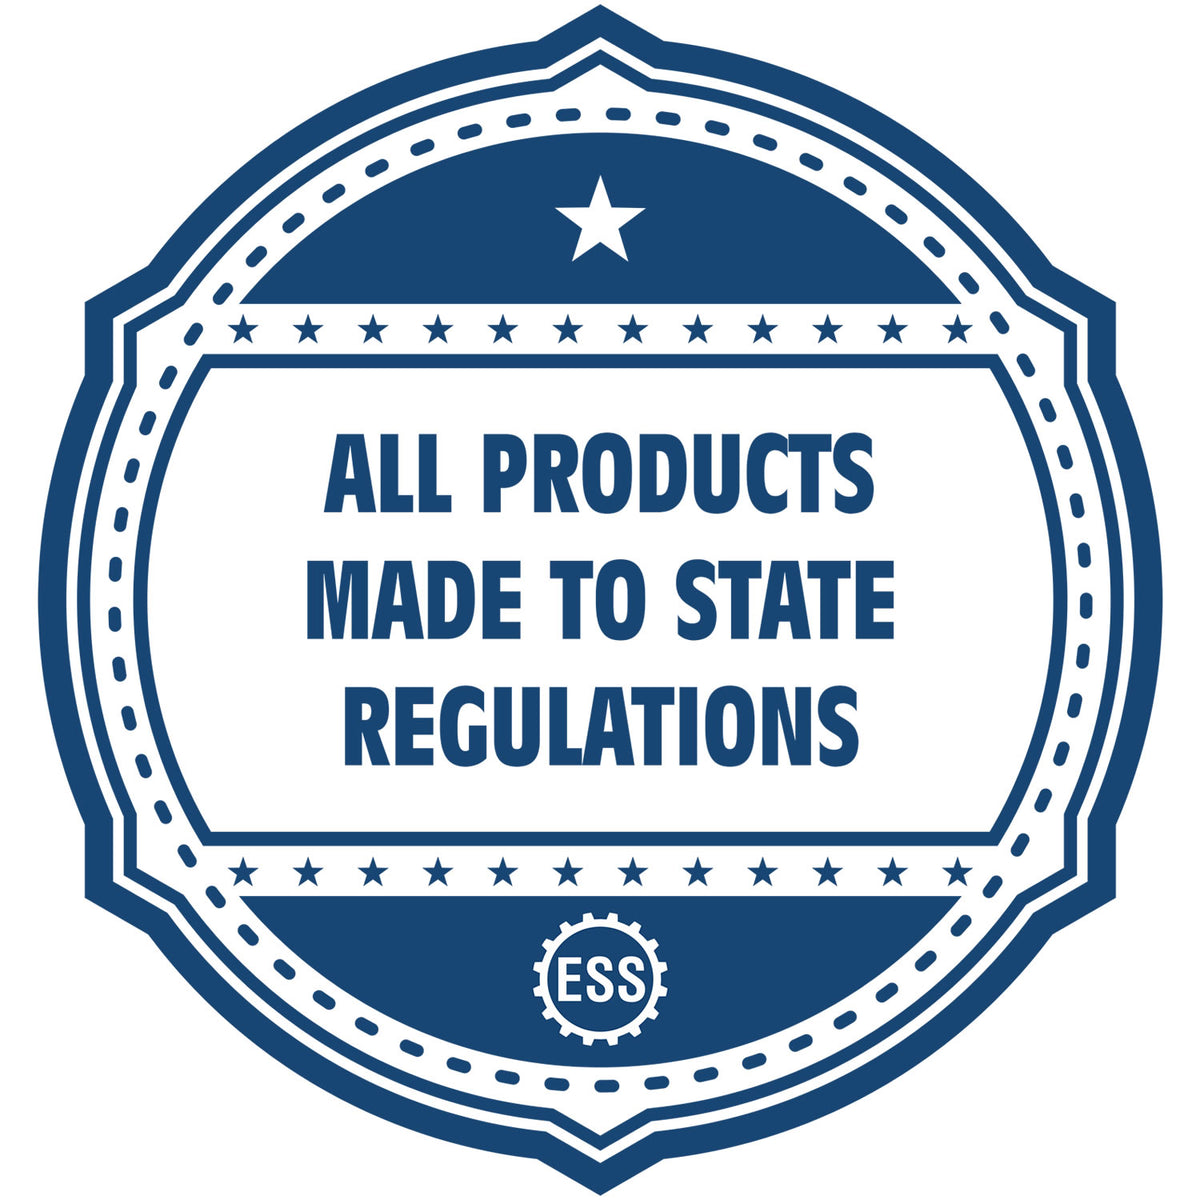 An icon or badge element for the Slim Pre-Inked Rhode Island Land Surveyor Seal Stamp showing that this product is made in compliance with state regulations.